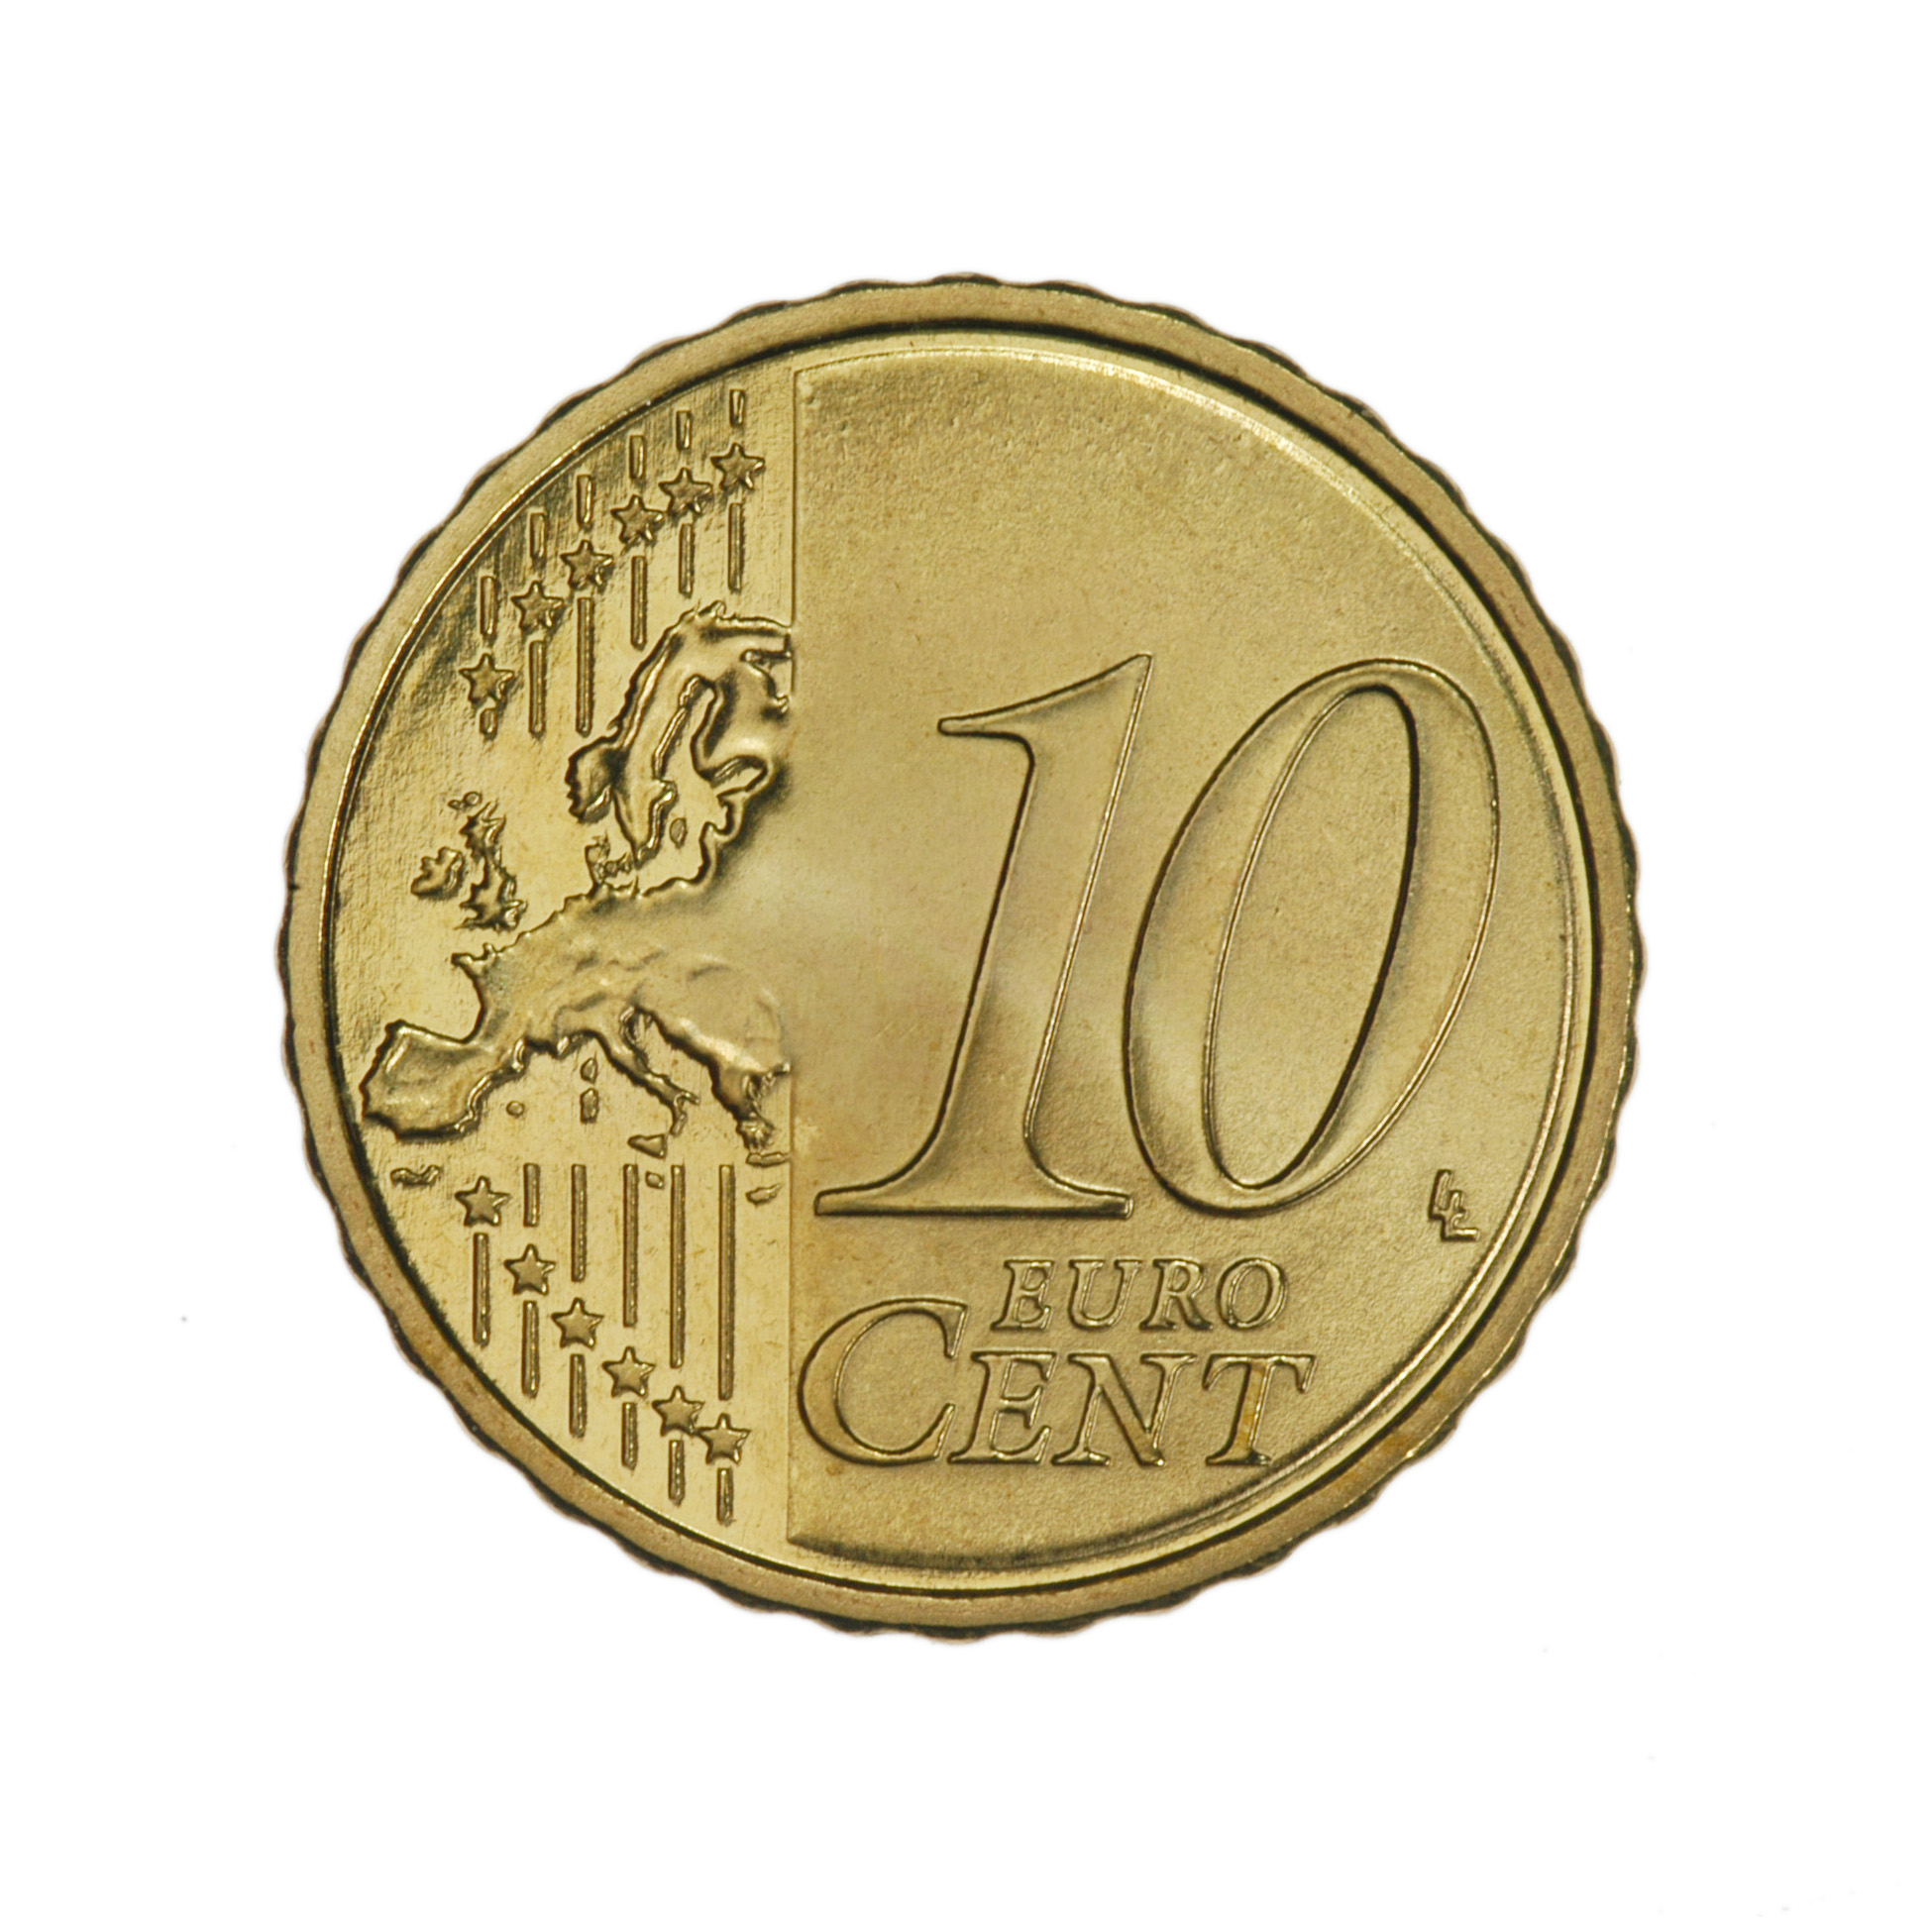 Designs of euro coins will be amended in 2007